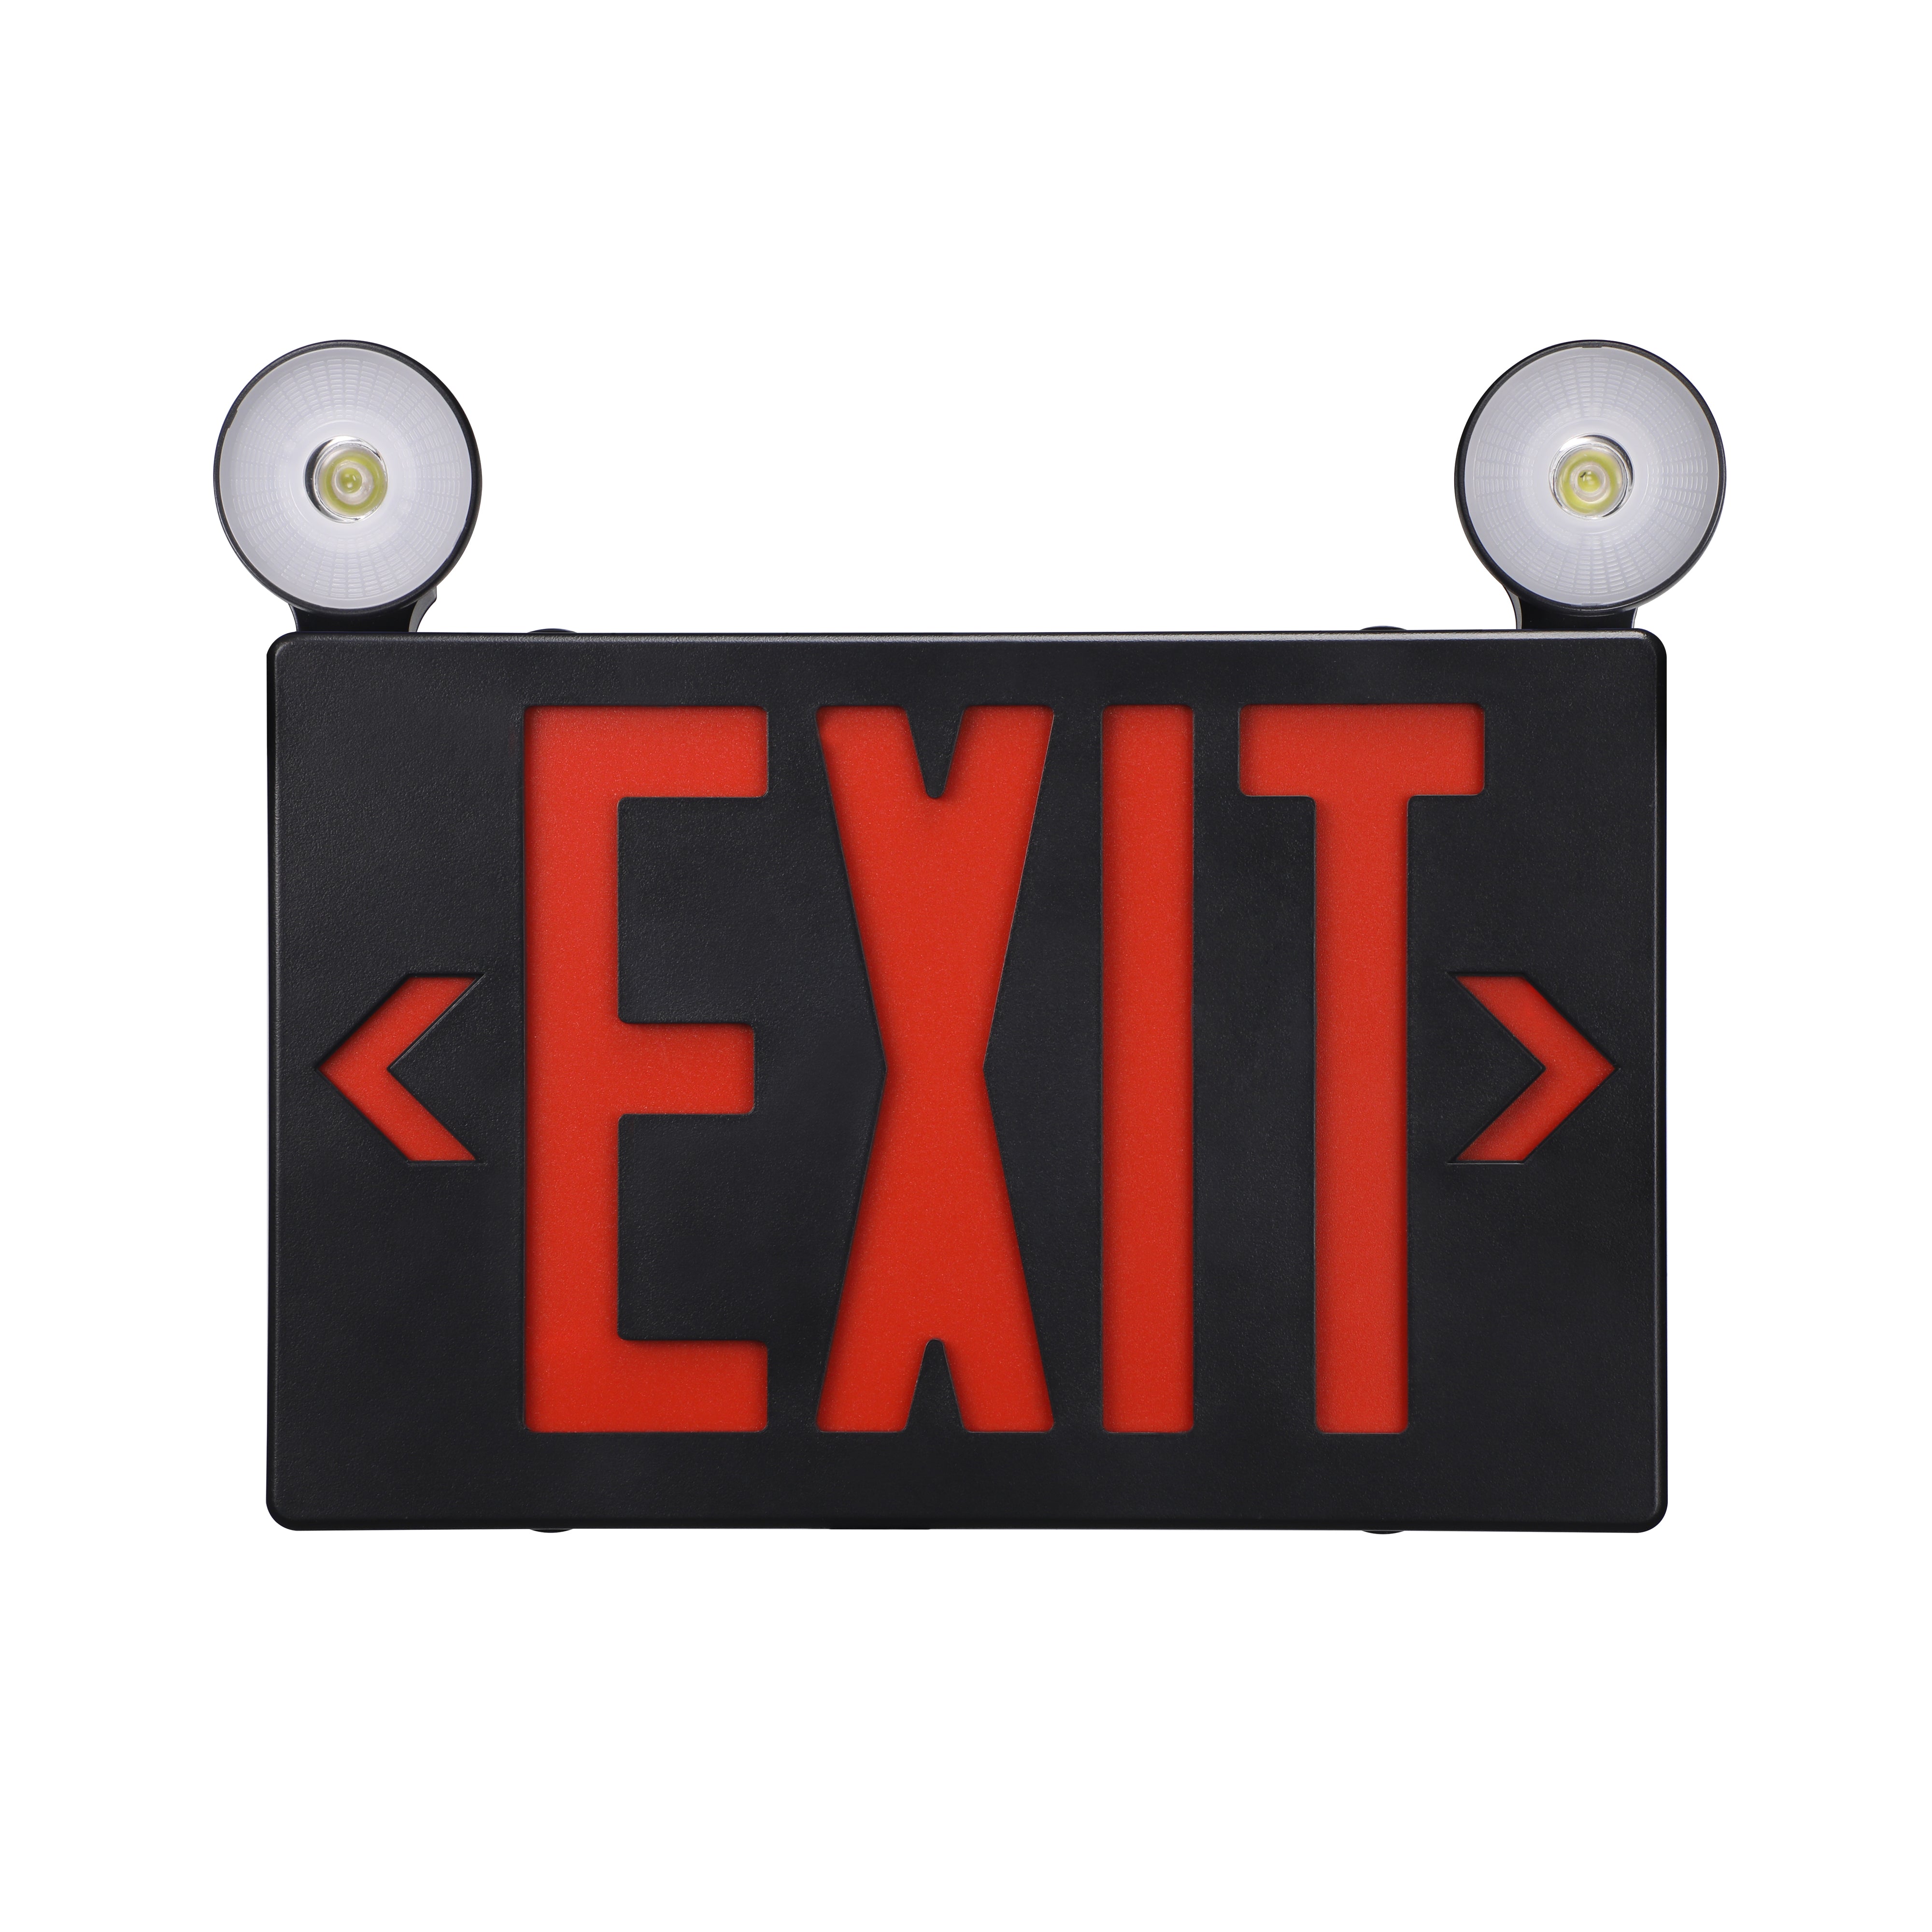 LitWay Indoor Exit Sign with Emergency Light - Black - Red Letters